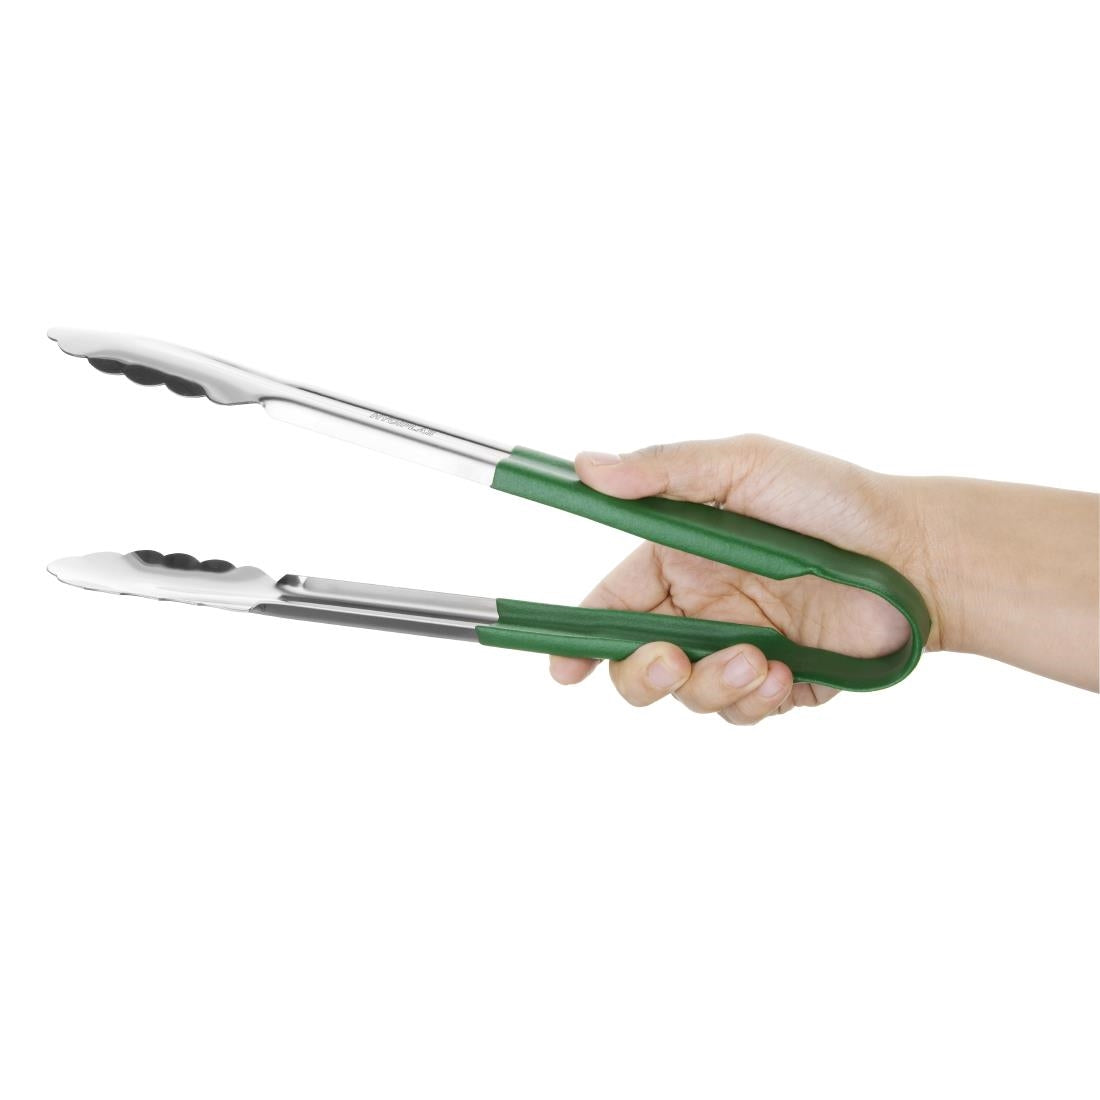 Vogue Colour Coded Green Serving Tongs 11"